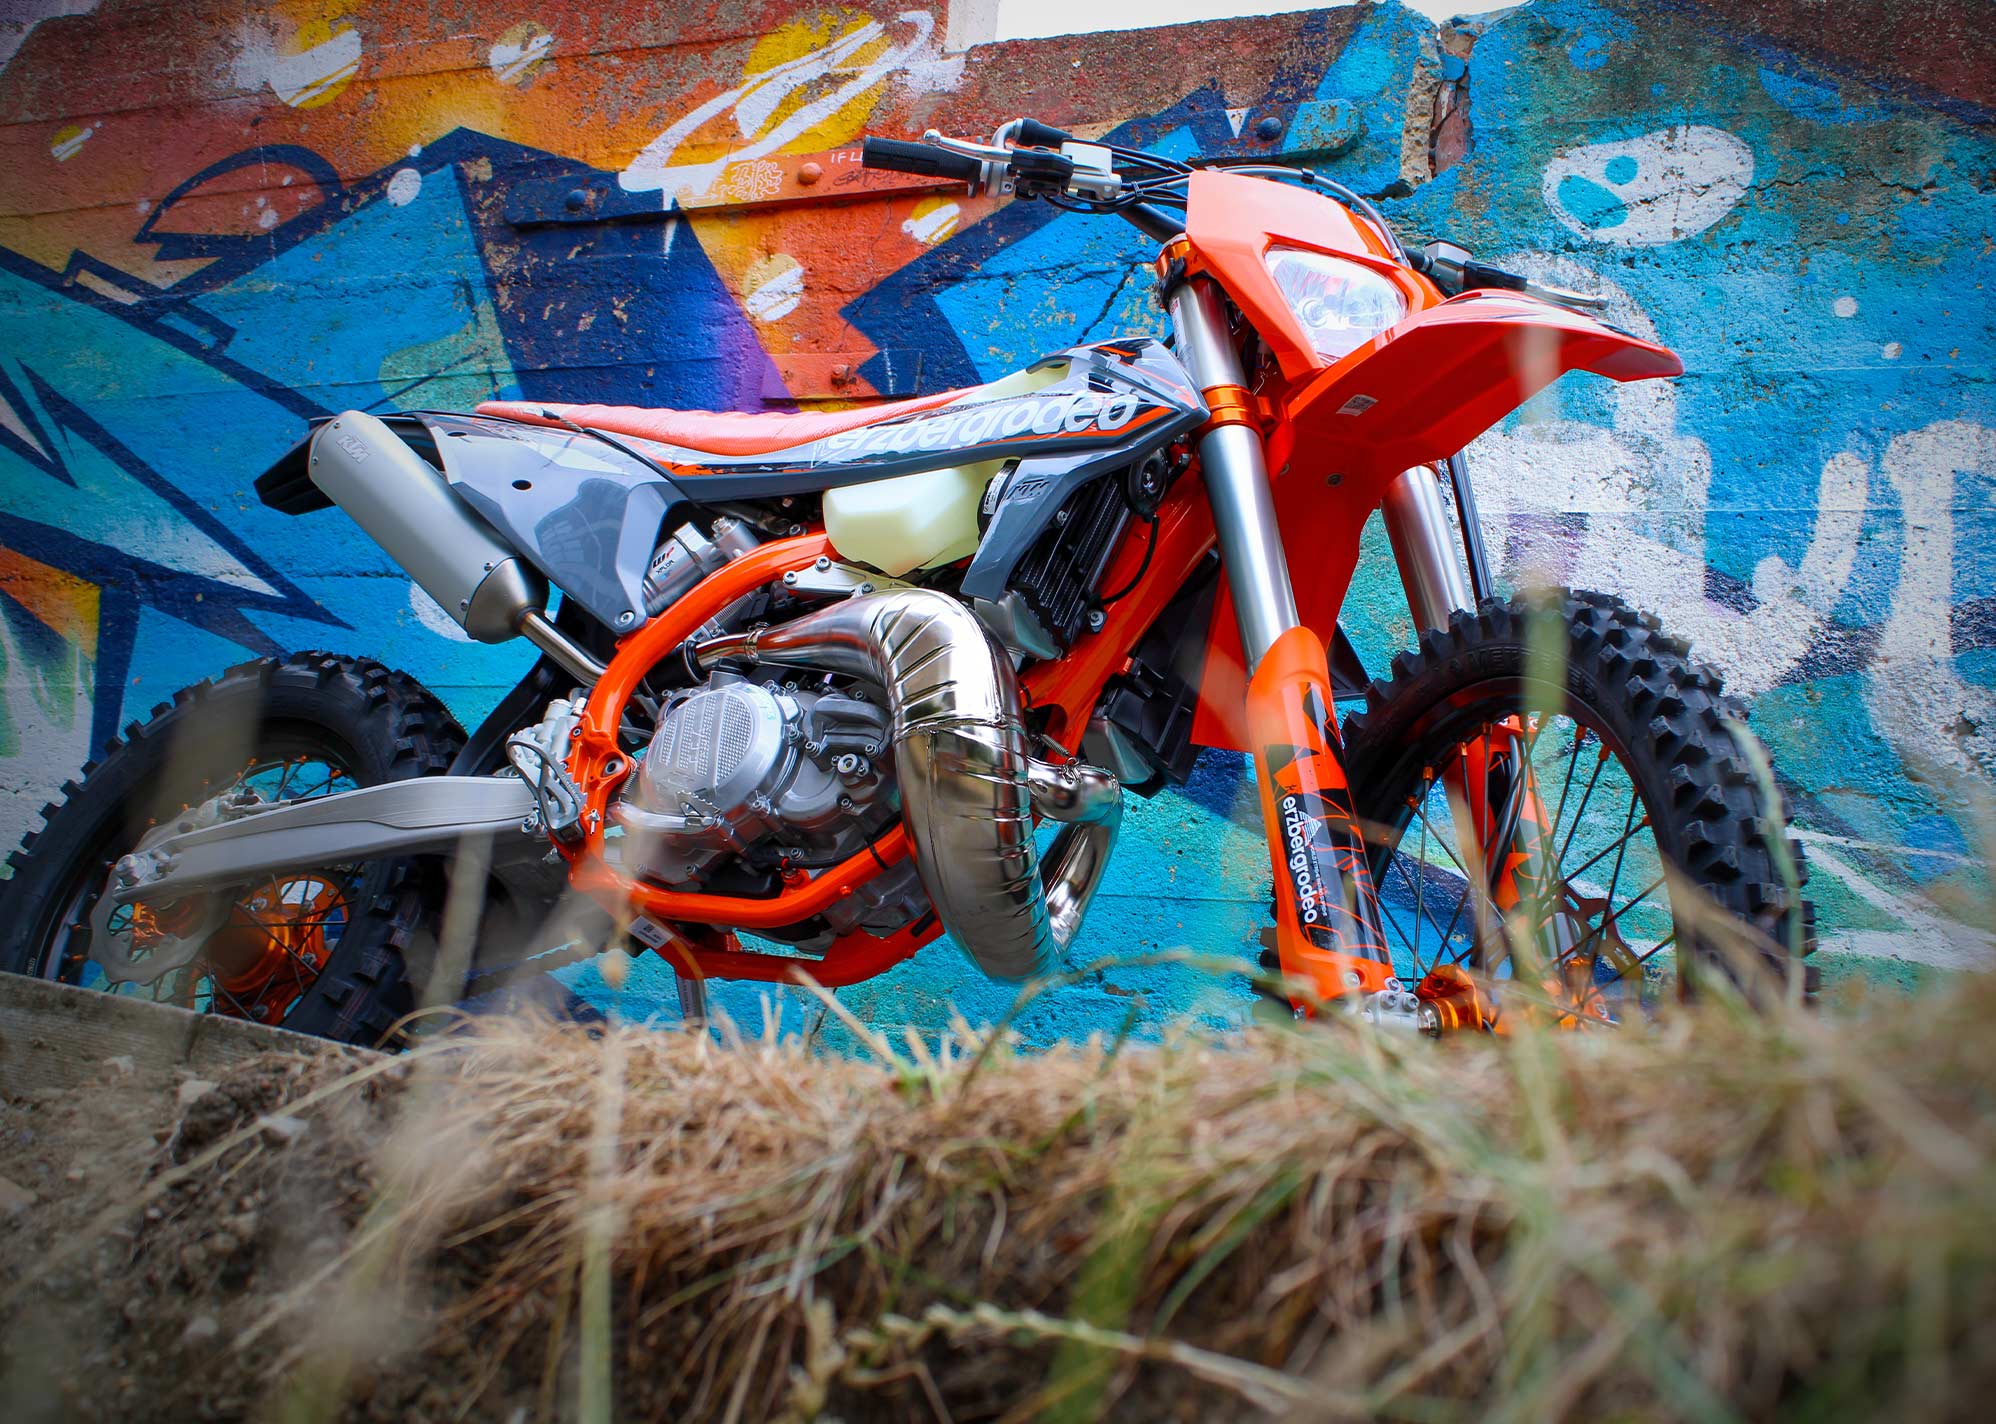 The new 2023 KTM 300 EXC Erzbergrodeo by Graffiti